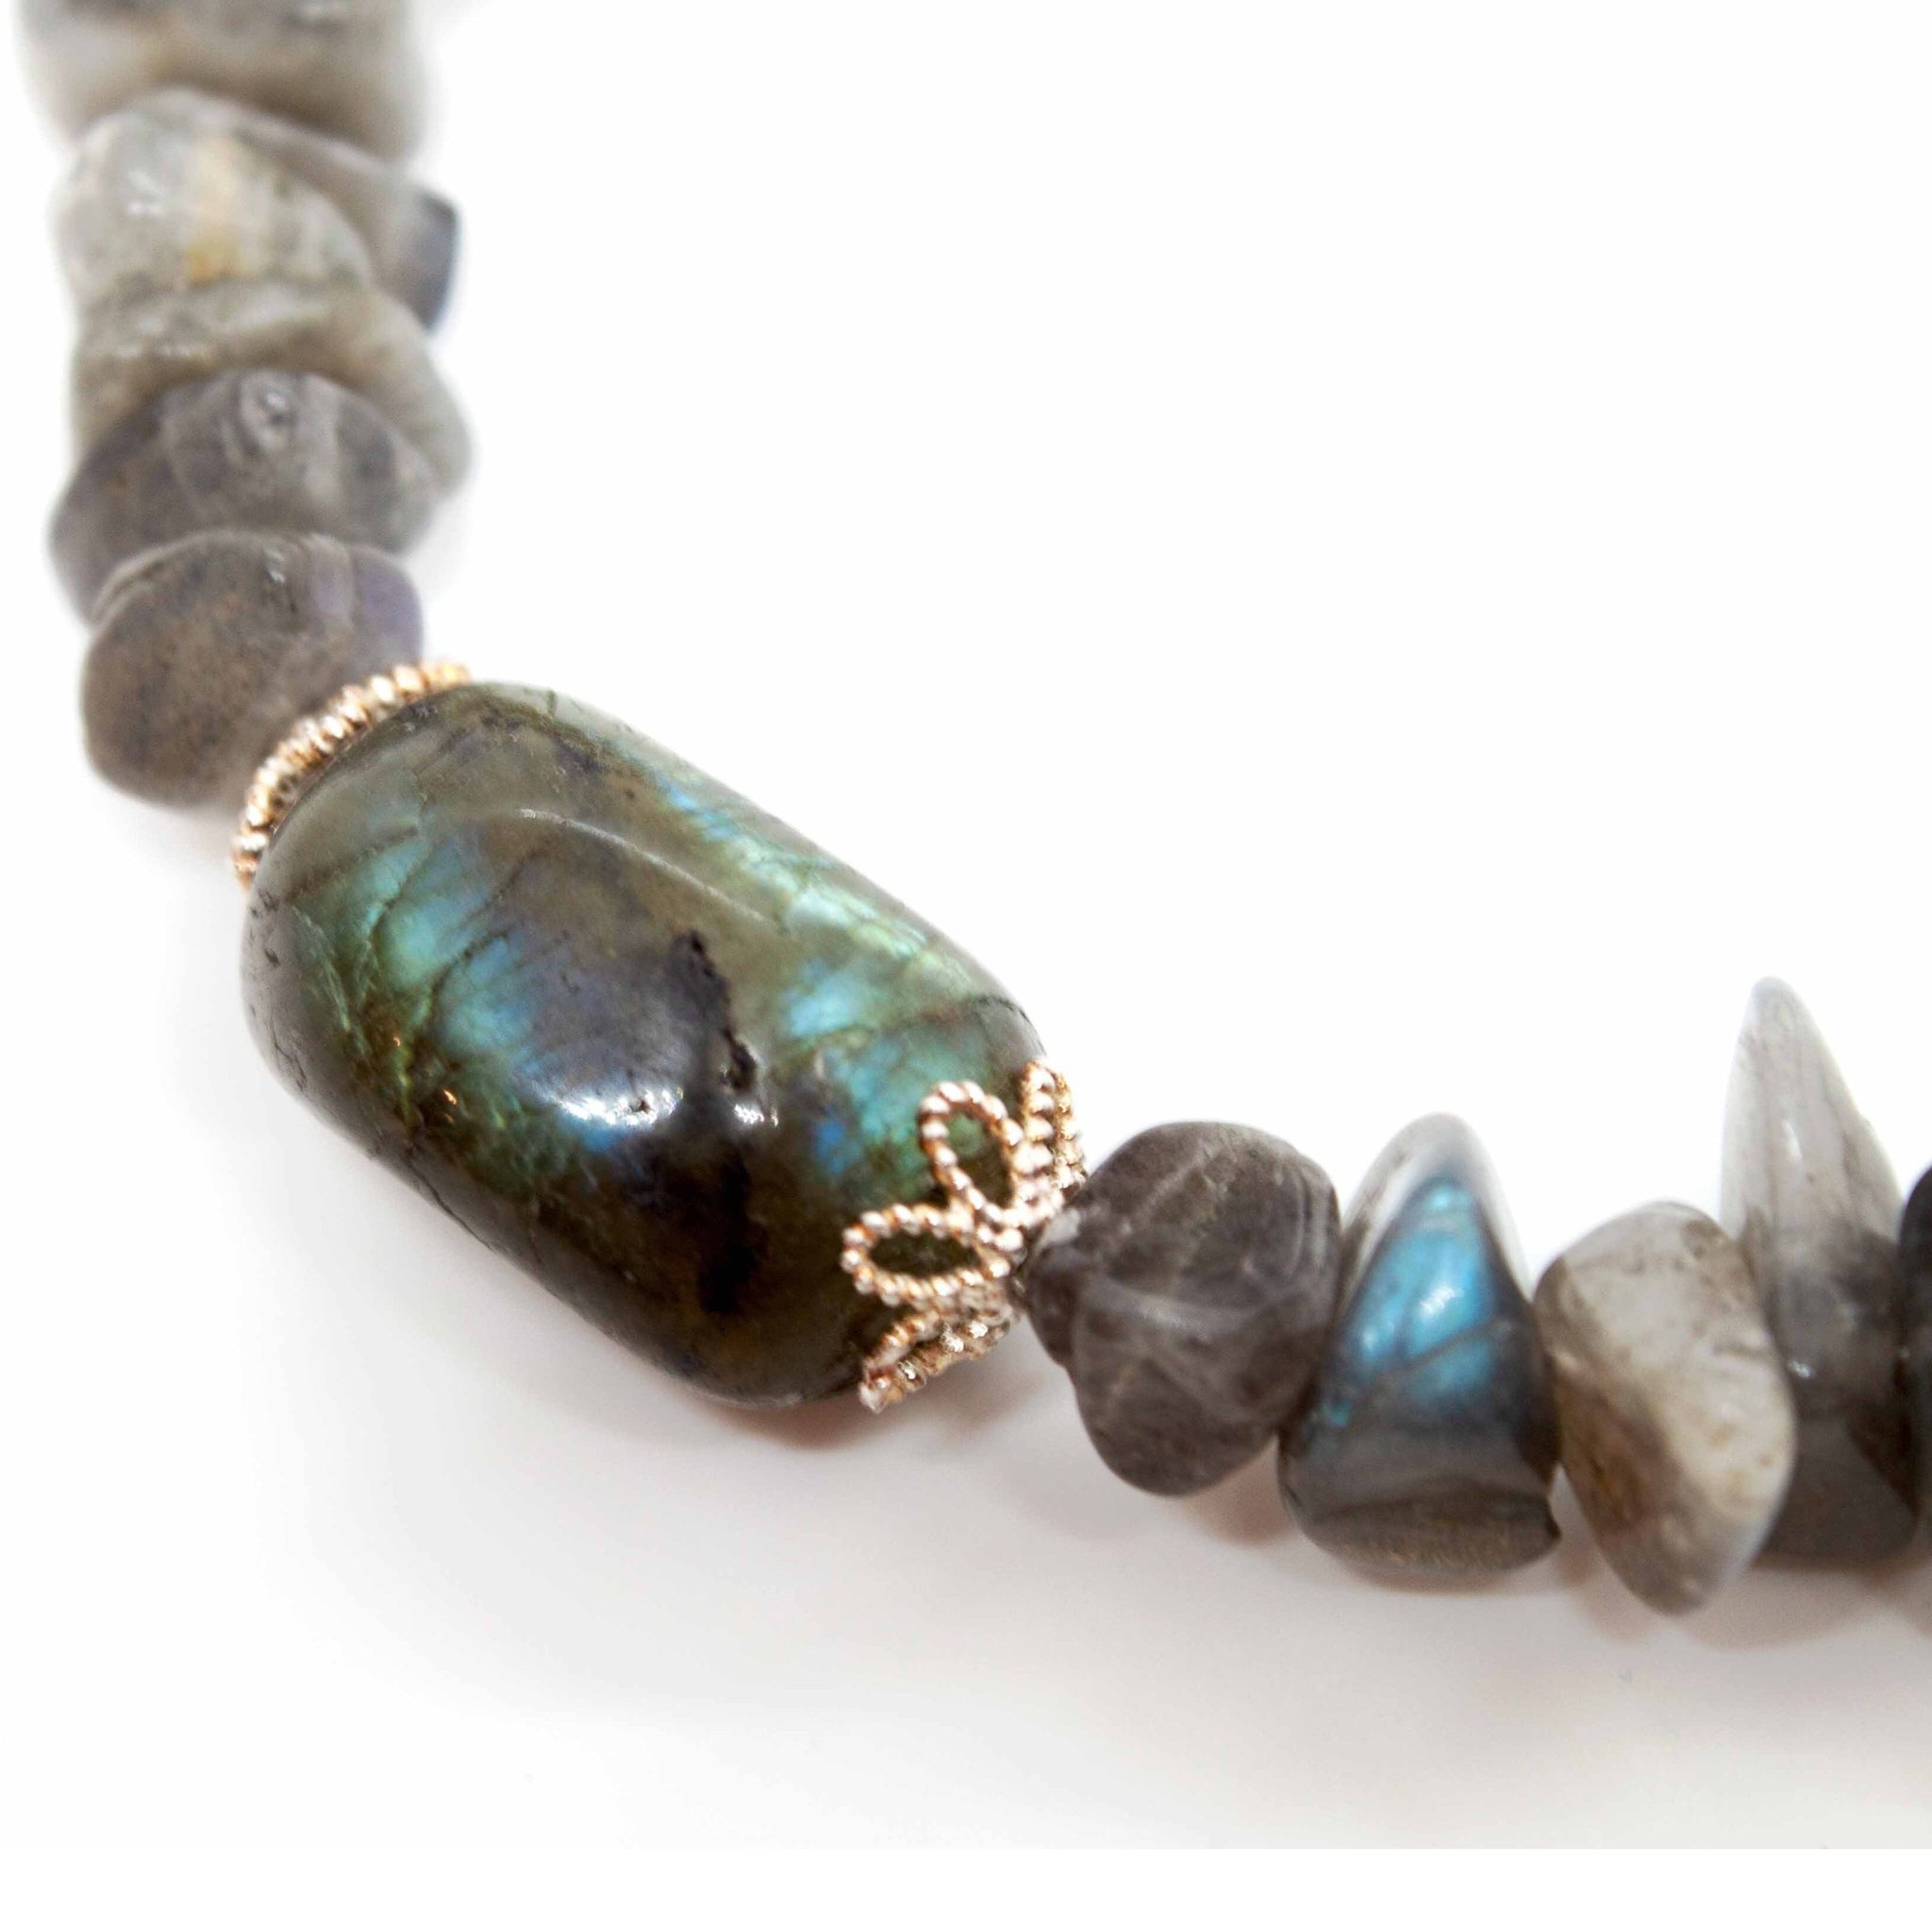 17 inch luminescent beaded labradorite statement necklace with sterling silver toggle clasp.